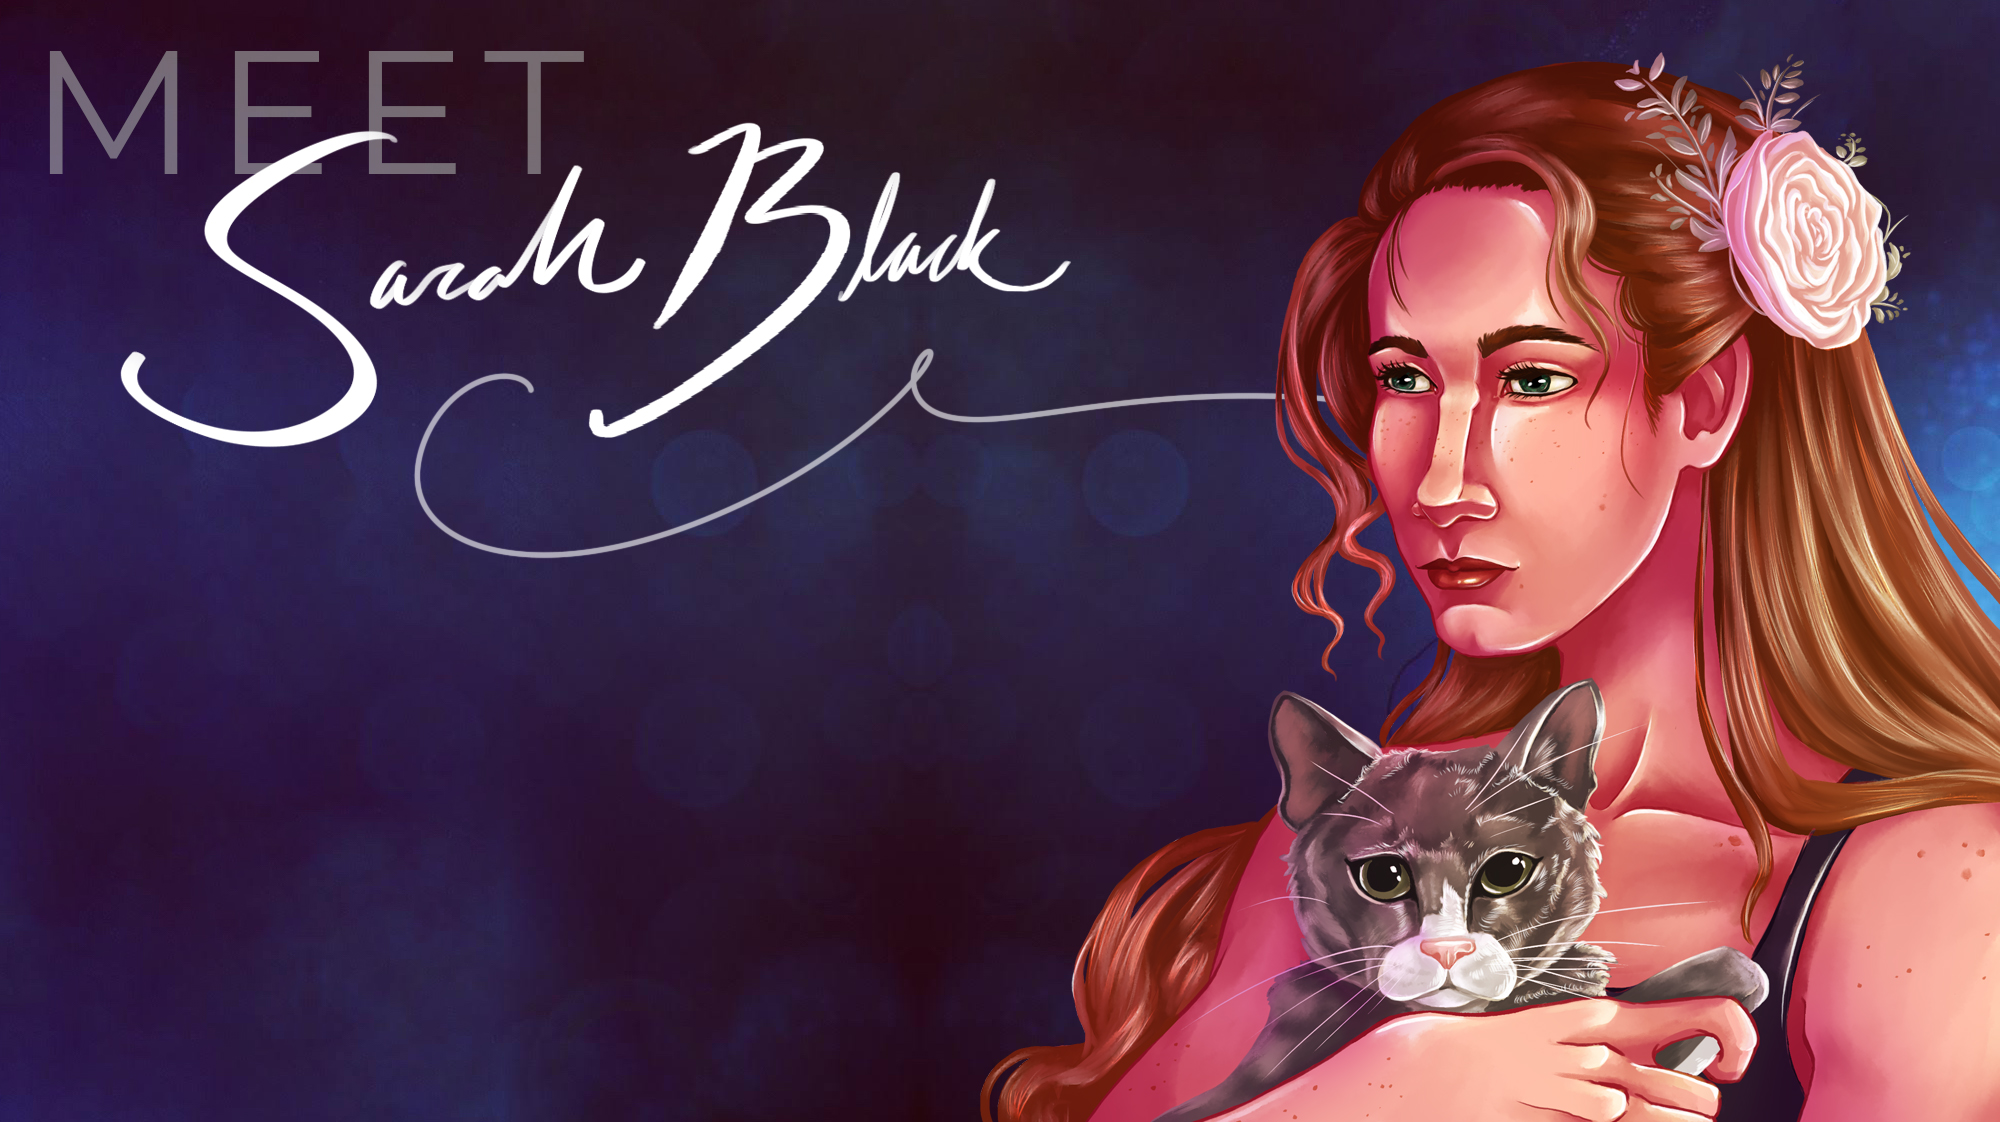 An illustrated portrait of Sarah Black, our newest teammate. The portrait is a digital painting created by Sarah Black. She's a white woman with long blond hair, wearing a purple tank top, and holding a grey and white cat named Mama. In text, it says "Meet Sarah Black", with her name in a hand-drawn cursive script.